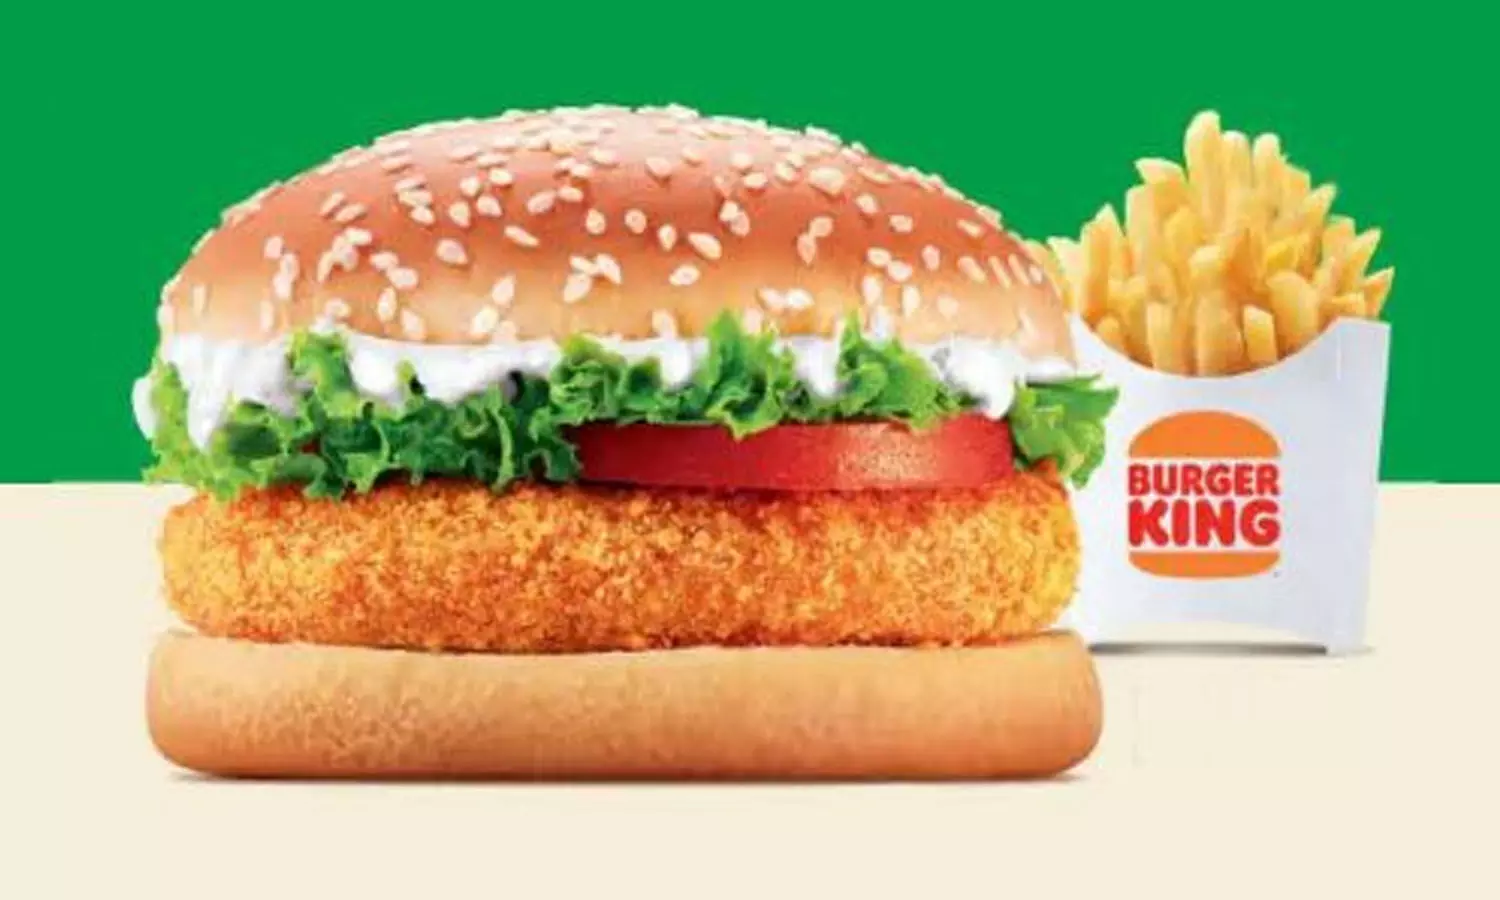 Burger King drops tomatoes from its menu, but isnt it too late?